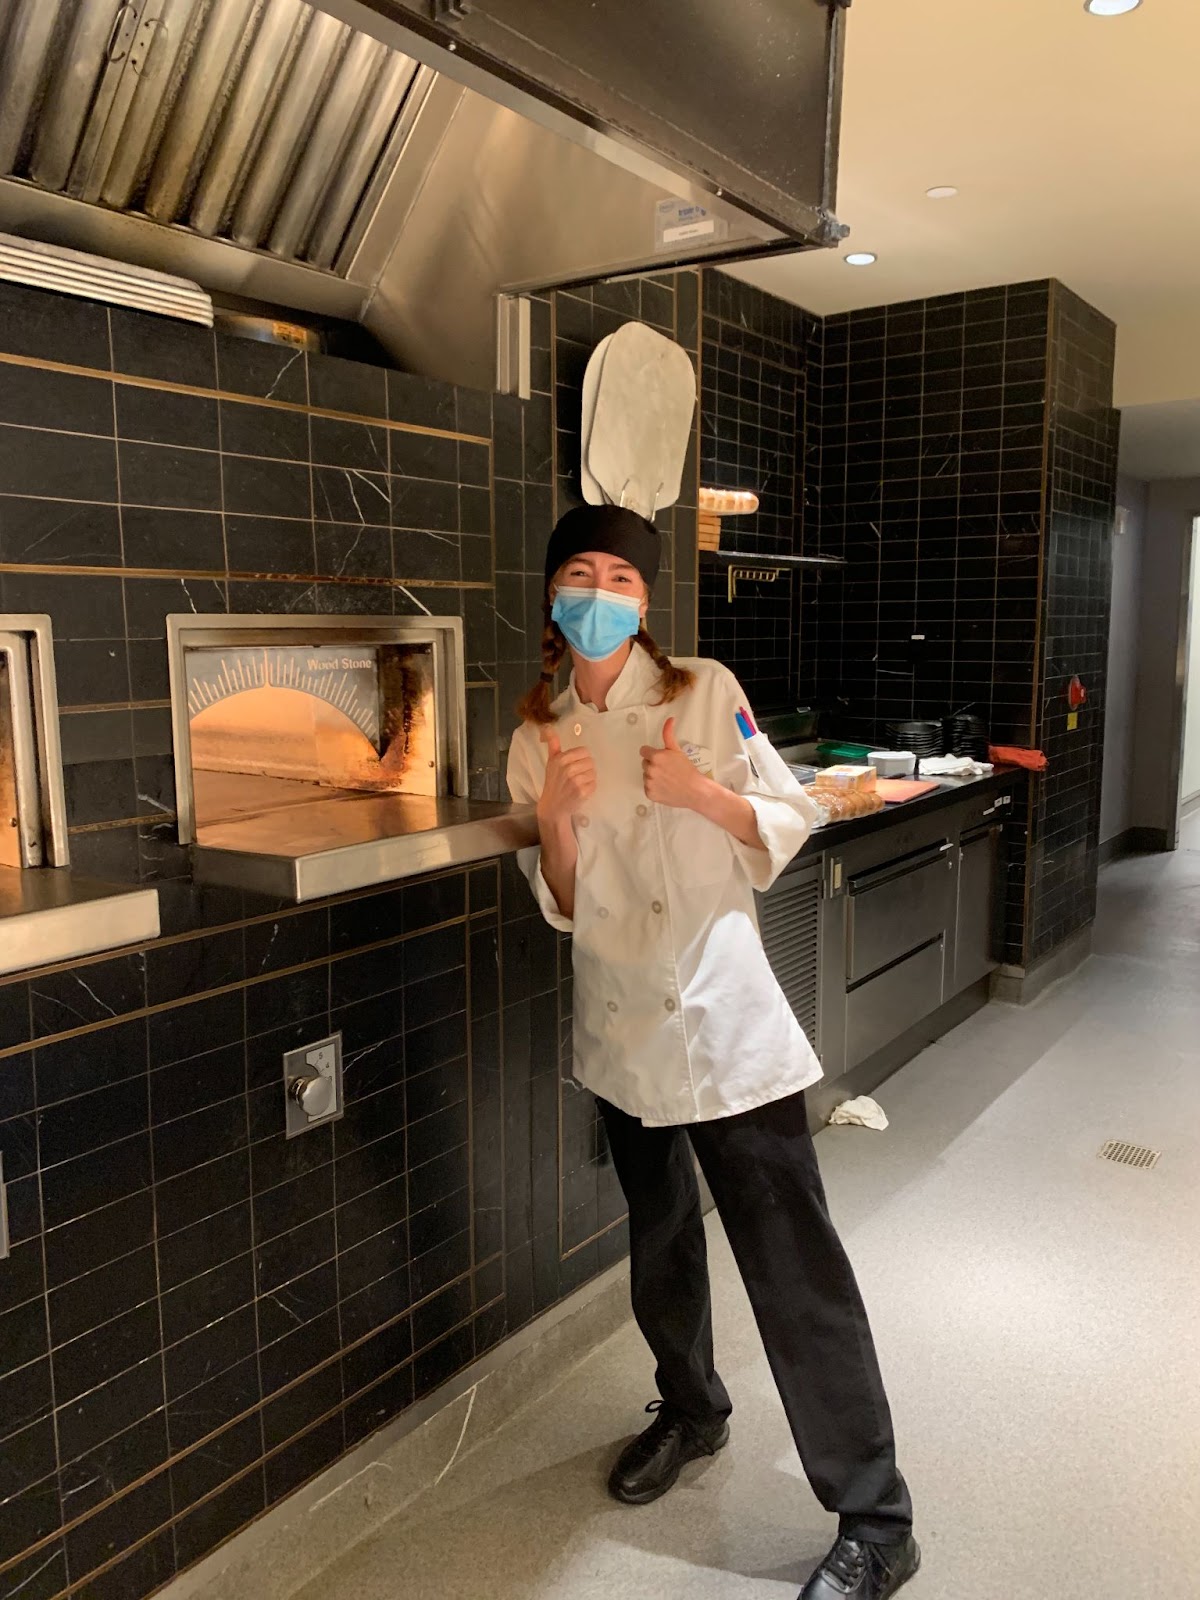 A woman in a chef apron smiling with thumbs up in front of an oven.